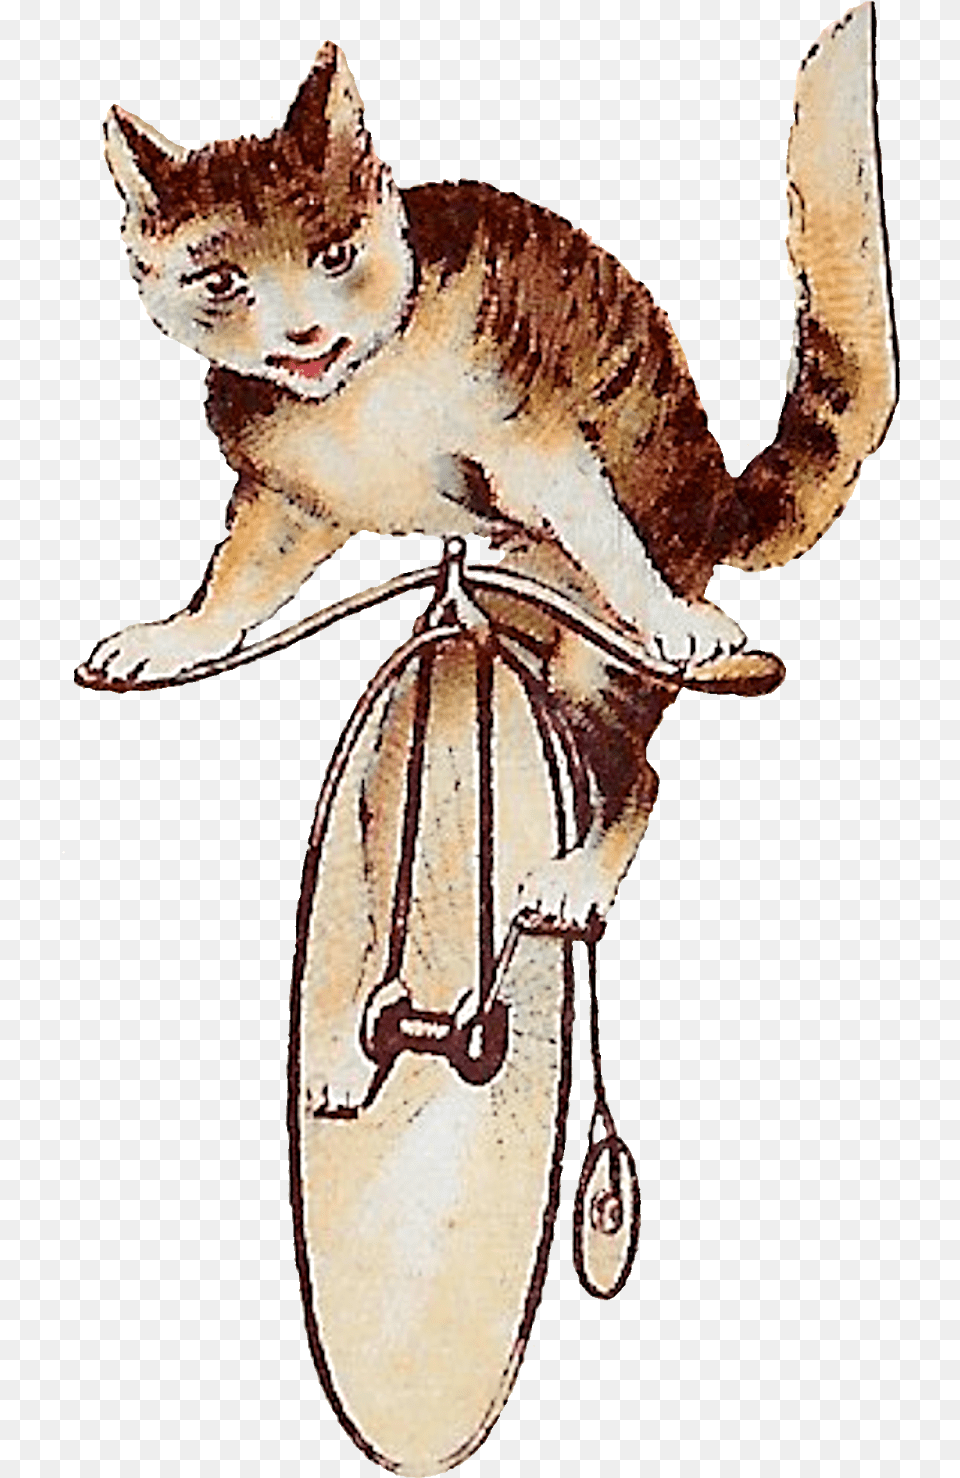 Digital Tabby Cats Riding Antique Bicycle Kitten, Animal, Dinosaur, Reptile, Cat Png